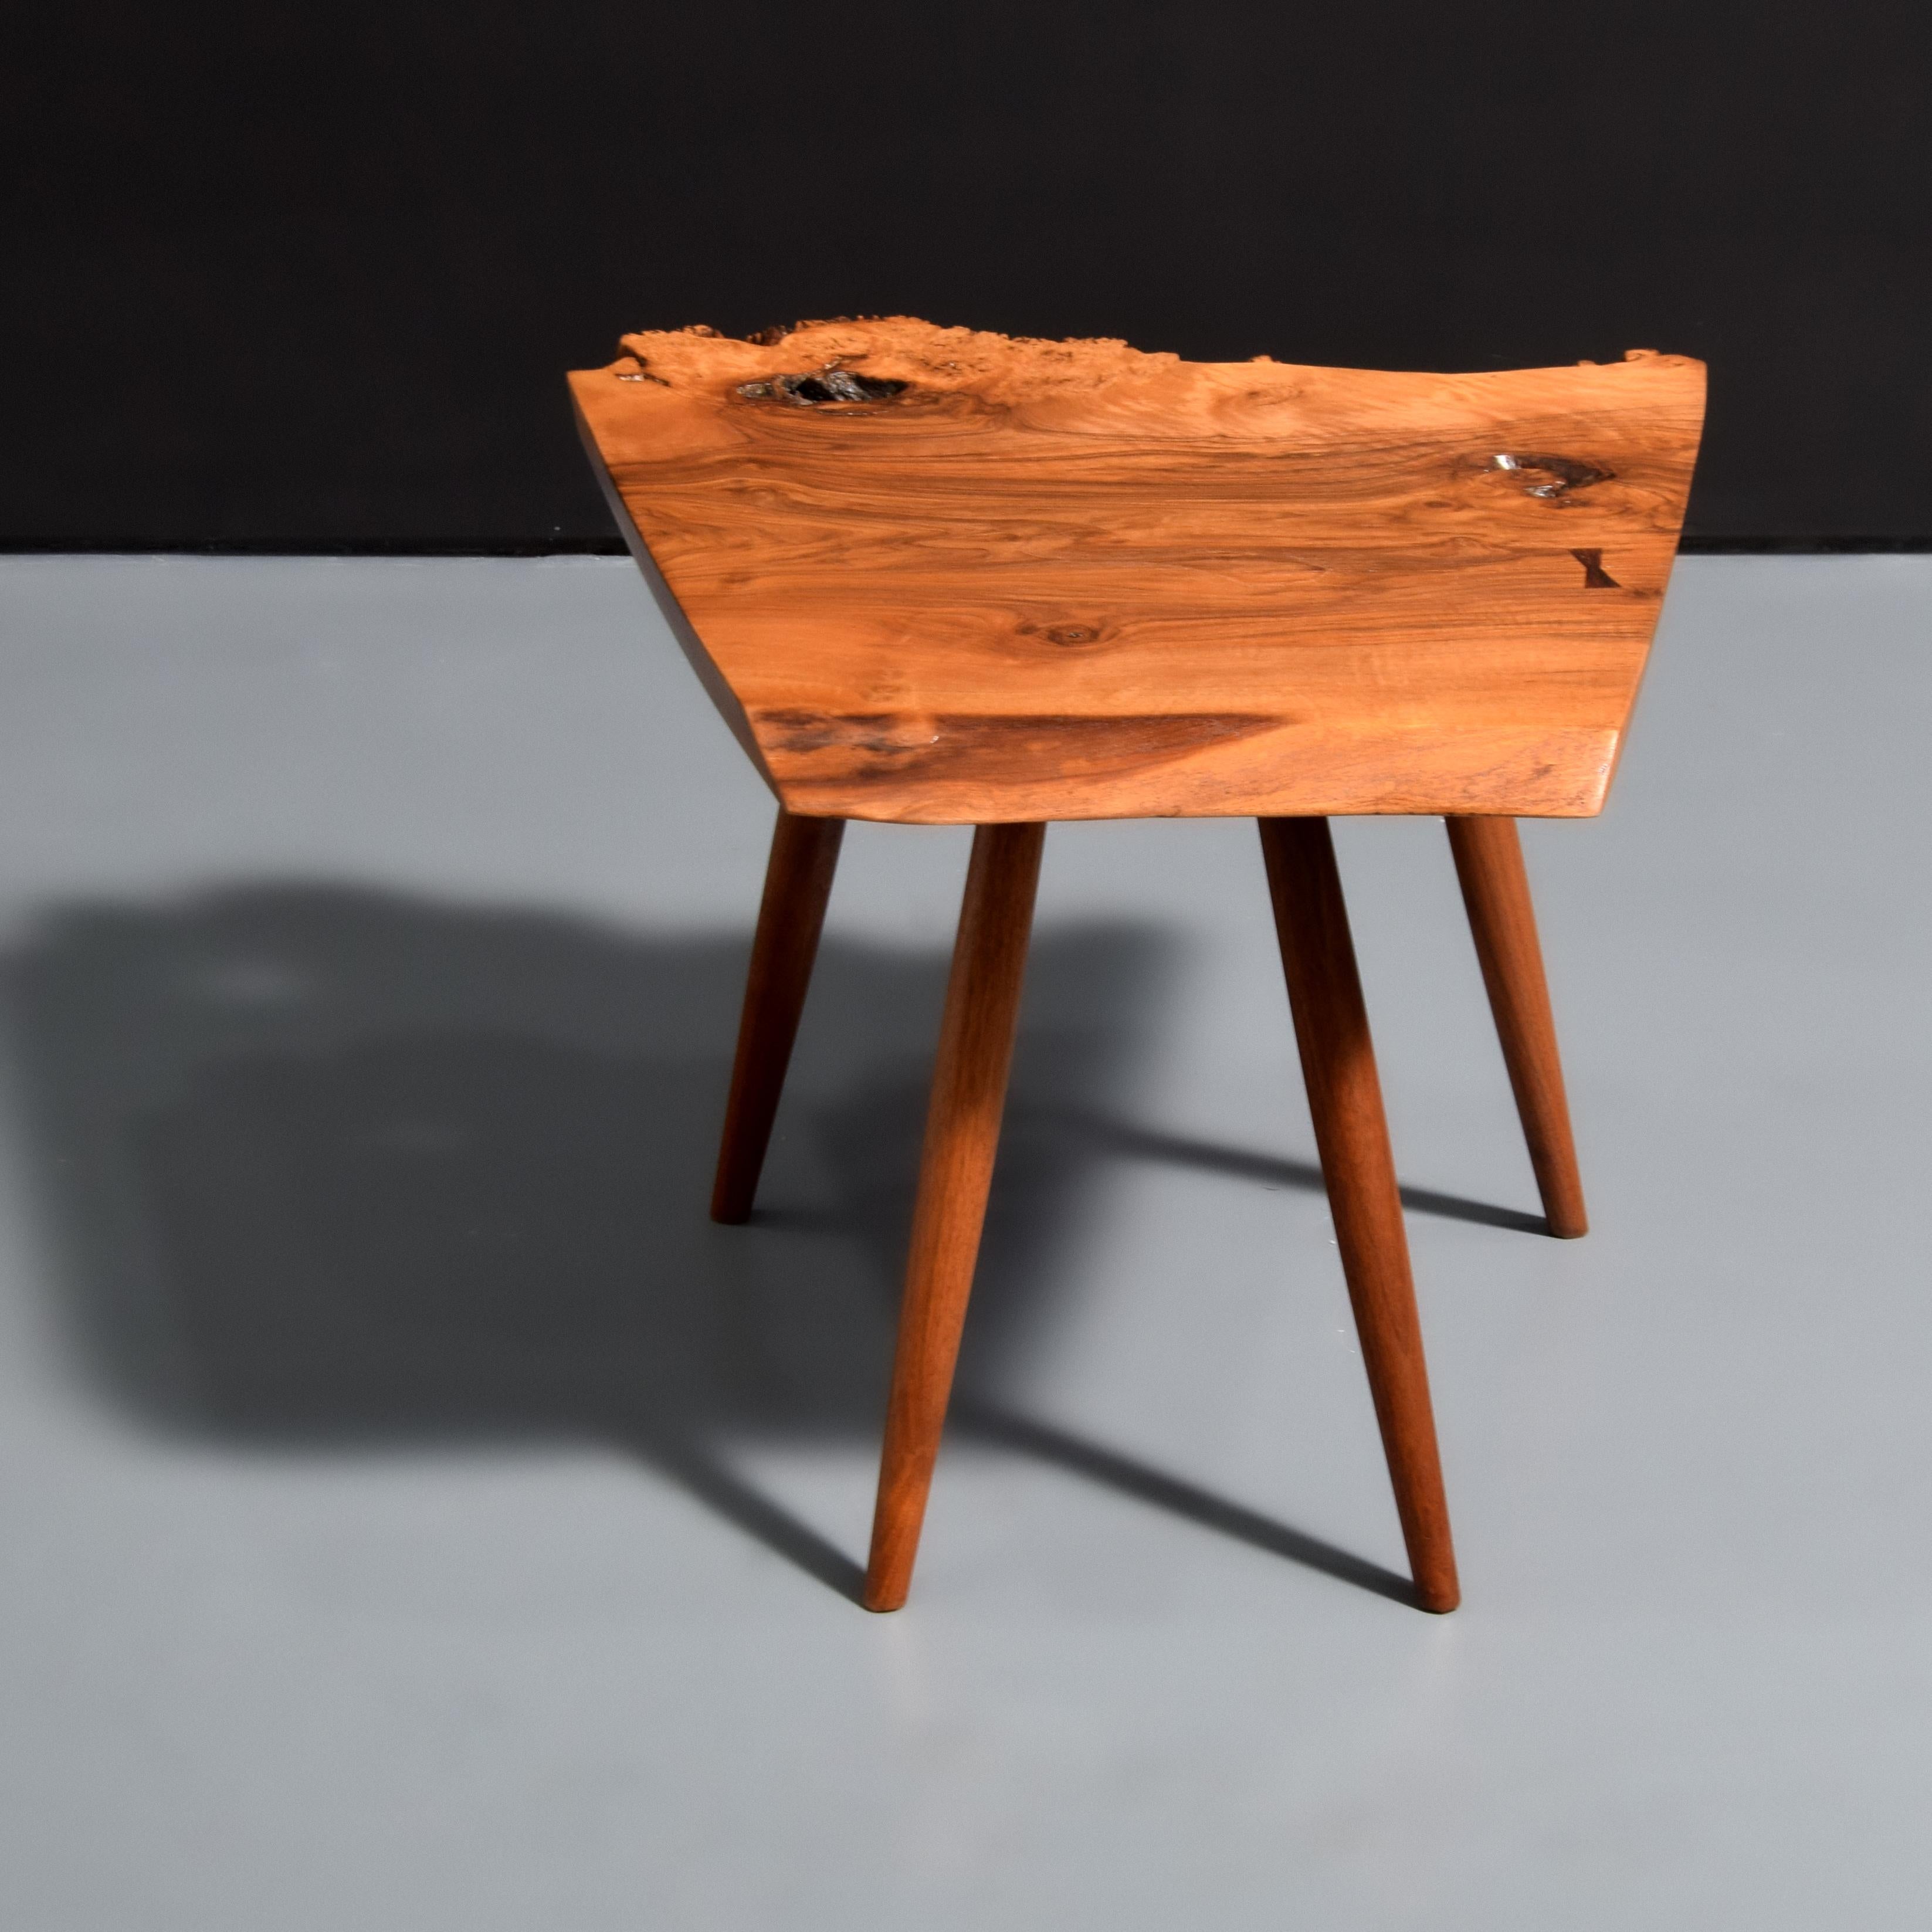 Artist/Designer: George Nakashima (American, 1905-1990); Nakashima Studio

Additional Information: Exceptional occasional/end table with a highly-figured single slab top, burled free edges, expressive graining, knots and fissures. Item includes a